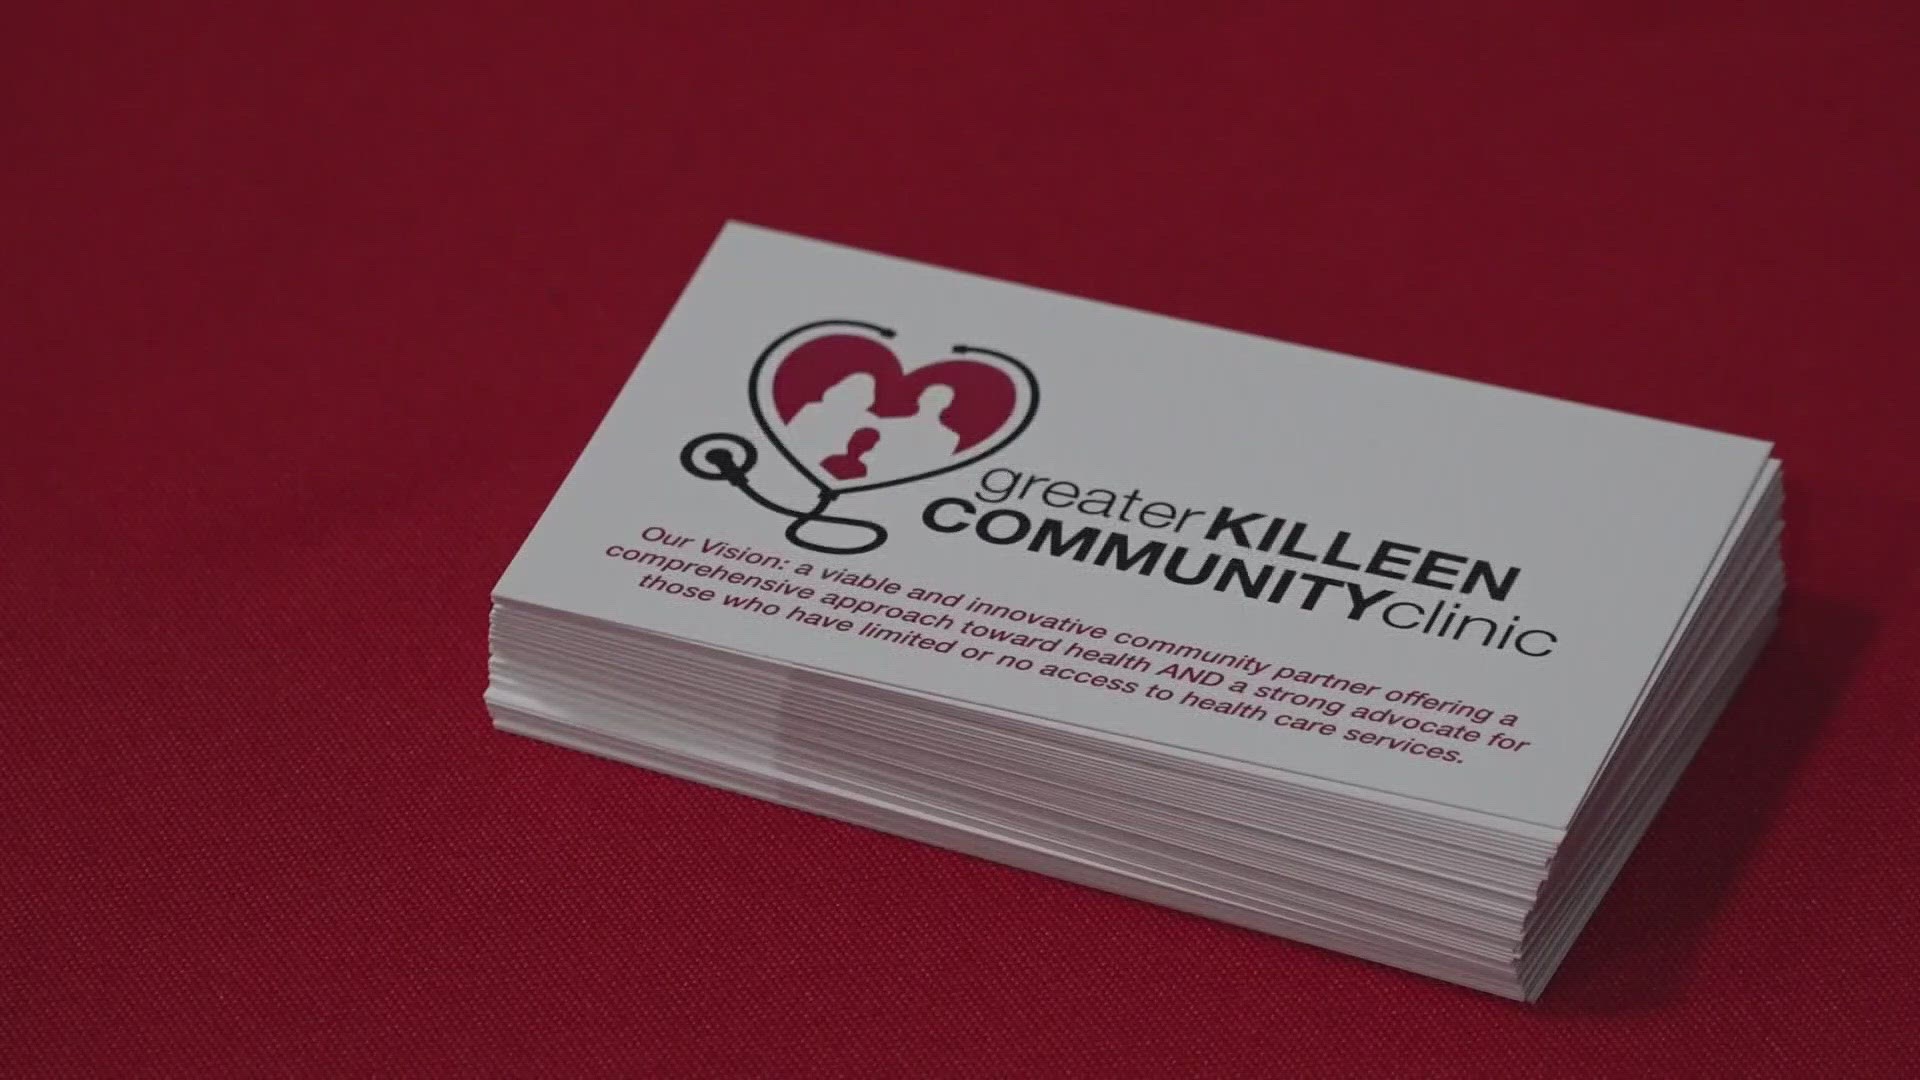 The Greater Killeen Community Clinic is offering free dental care starting at 8:00 a.m.